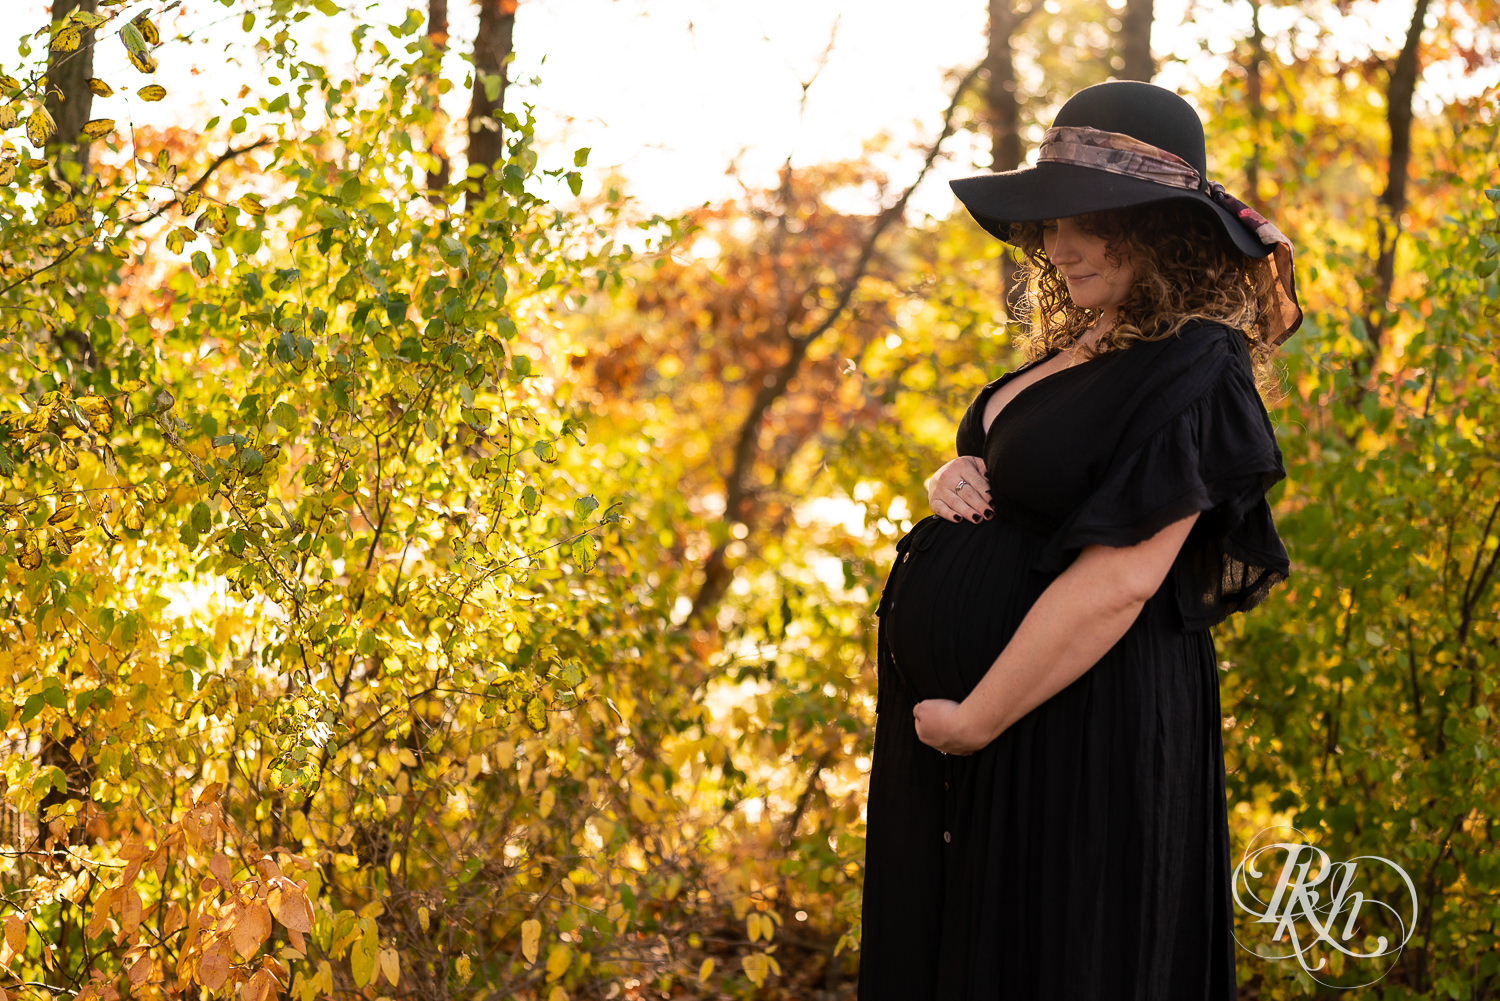 Pregnant woman in black dress and hat holds belly during sunset in Lebanon Hills Regional Park in Eagan, Minnesota.